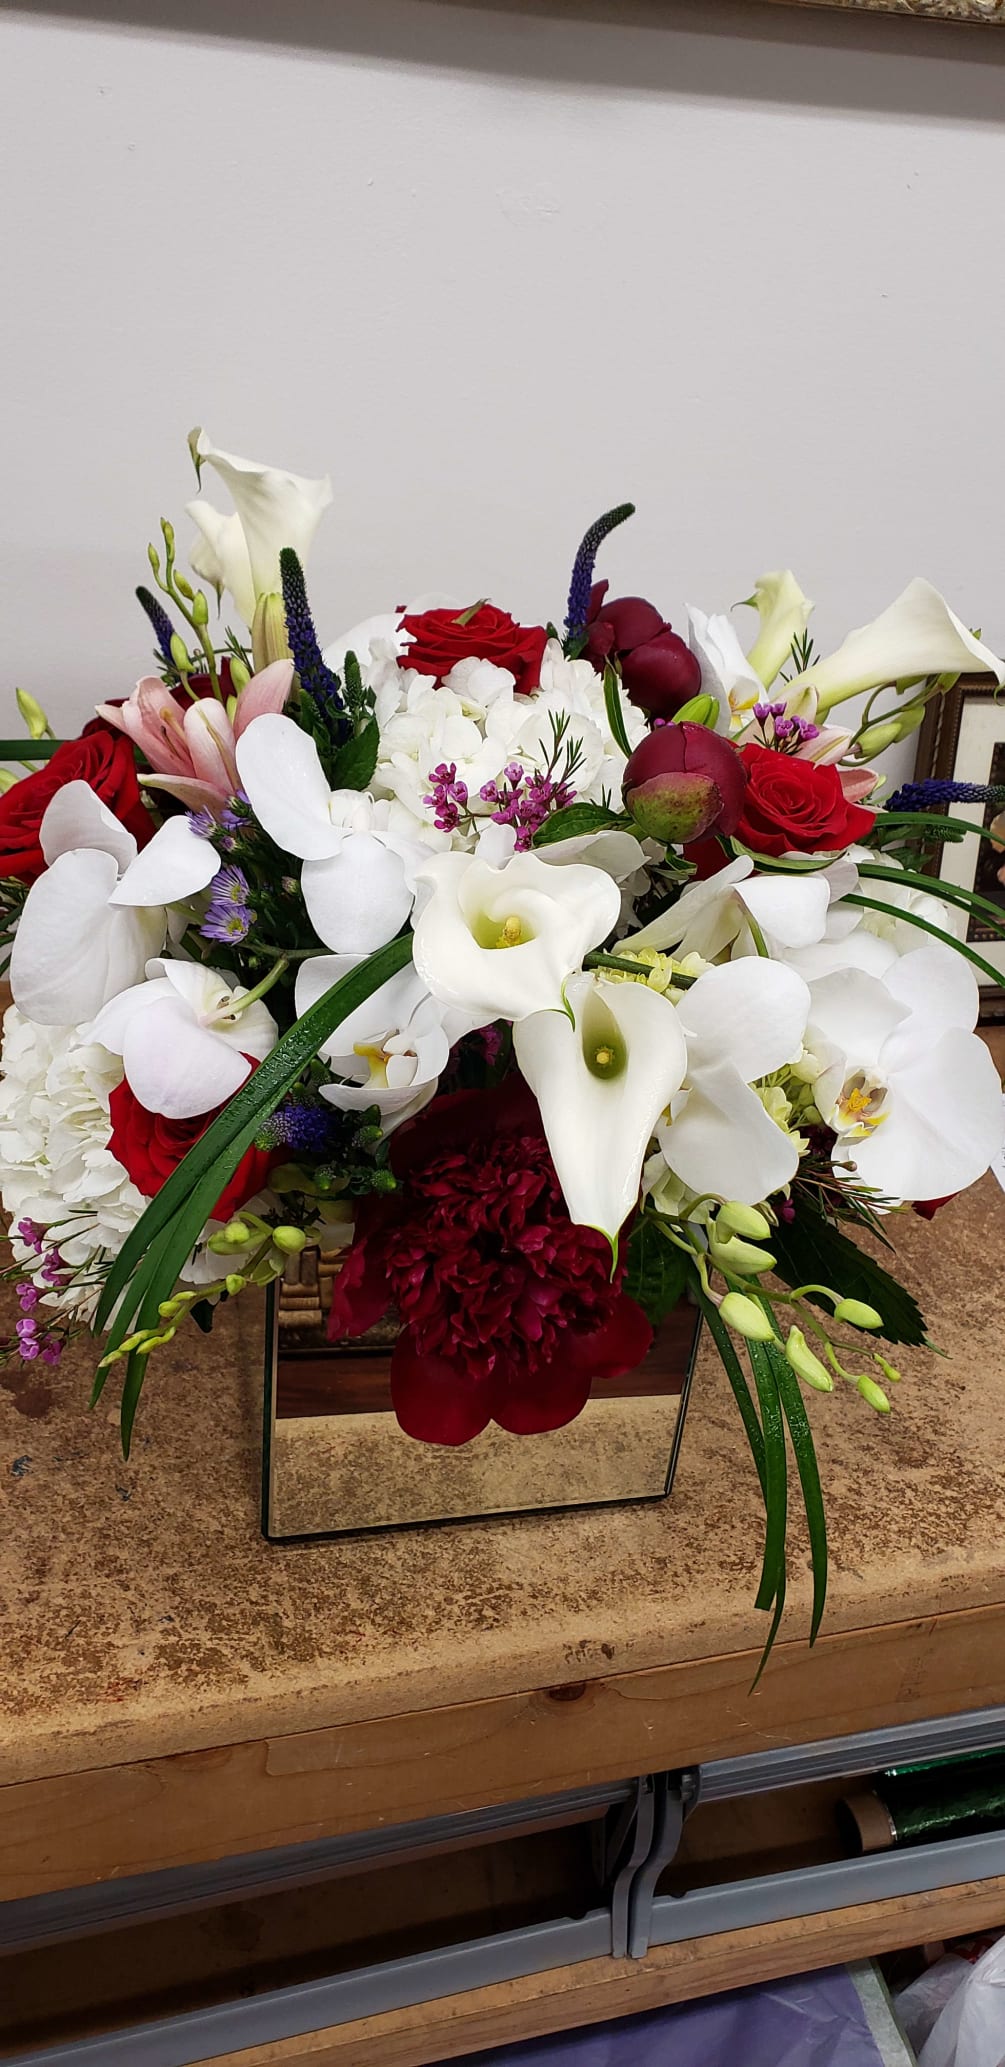 ELEGANT SQUARE MIRROR VASE MADE WITH LOVE FOR SOMEONE&#039;S DAY SPECIAL!